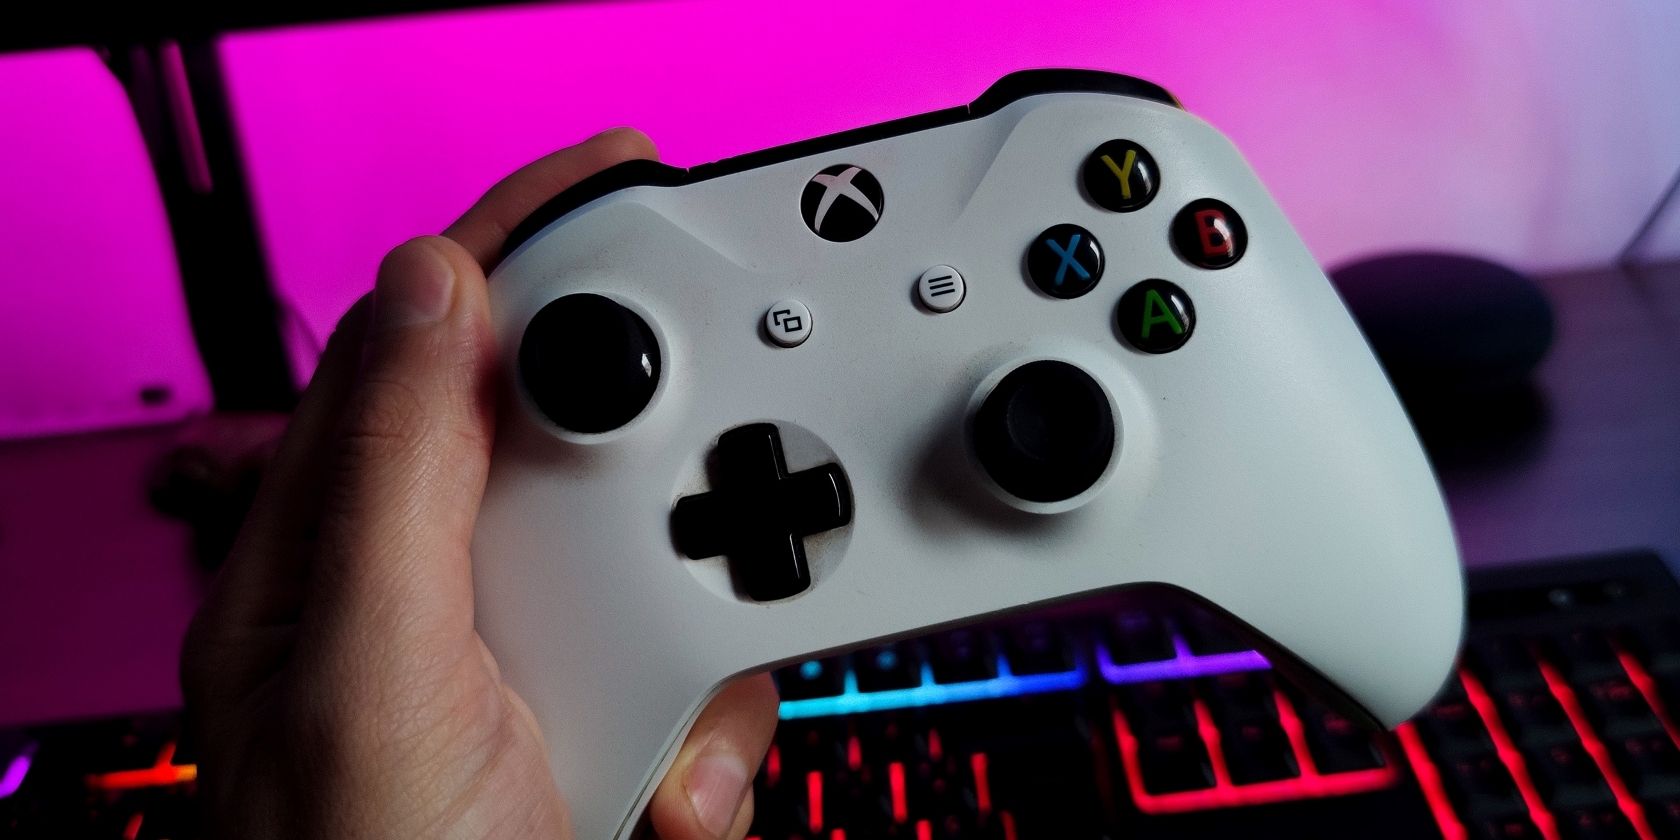 A photograph of someone holding a white Xbox Wireless Controller in front of a lit keyboard and monitor 